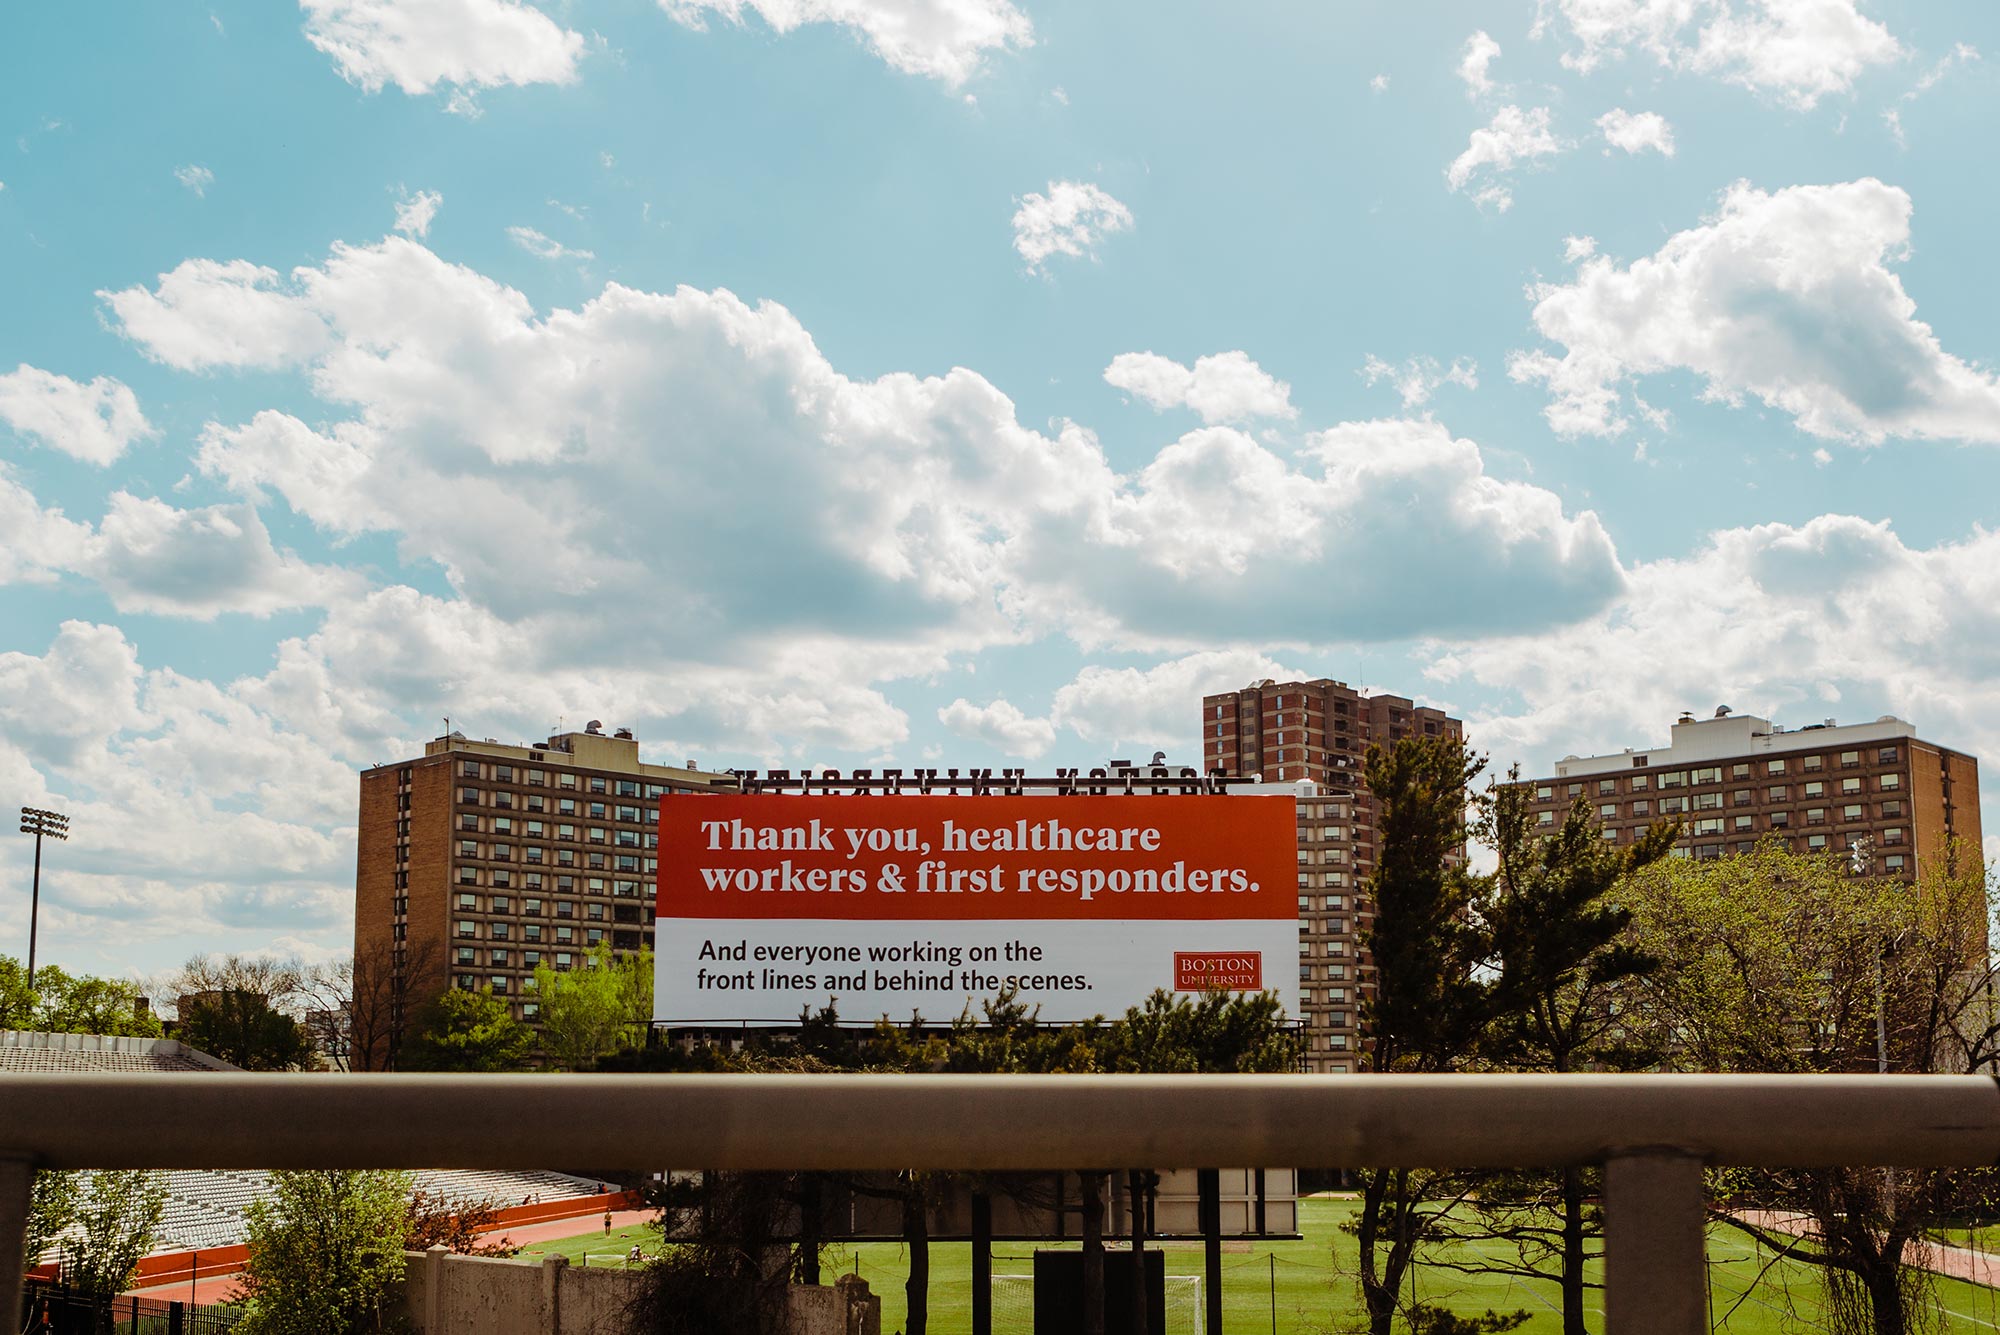 Image of a billboard behind Nickerson field thanks healthcare workers and first responders faces the Mass Pike. The sky is light blue with clouds. The sign reads "Thank you, healthcare workers & first responders. And everyone working on the front lines and behind the scenes.” The Boston University logo is seen on the bottom right of the sign.